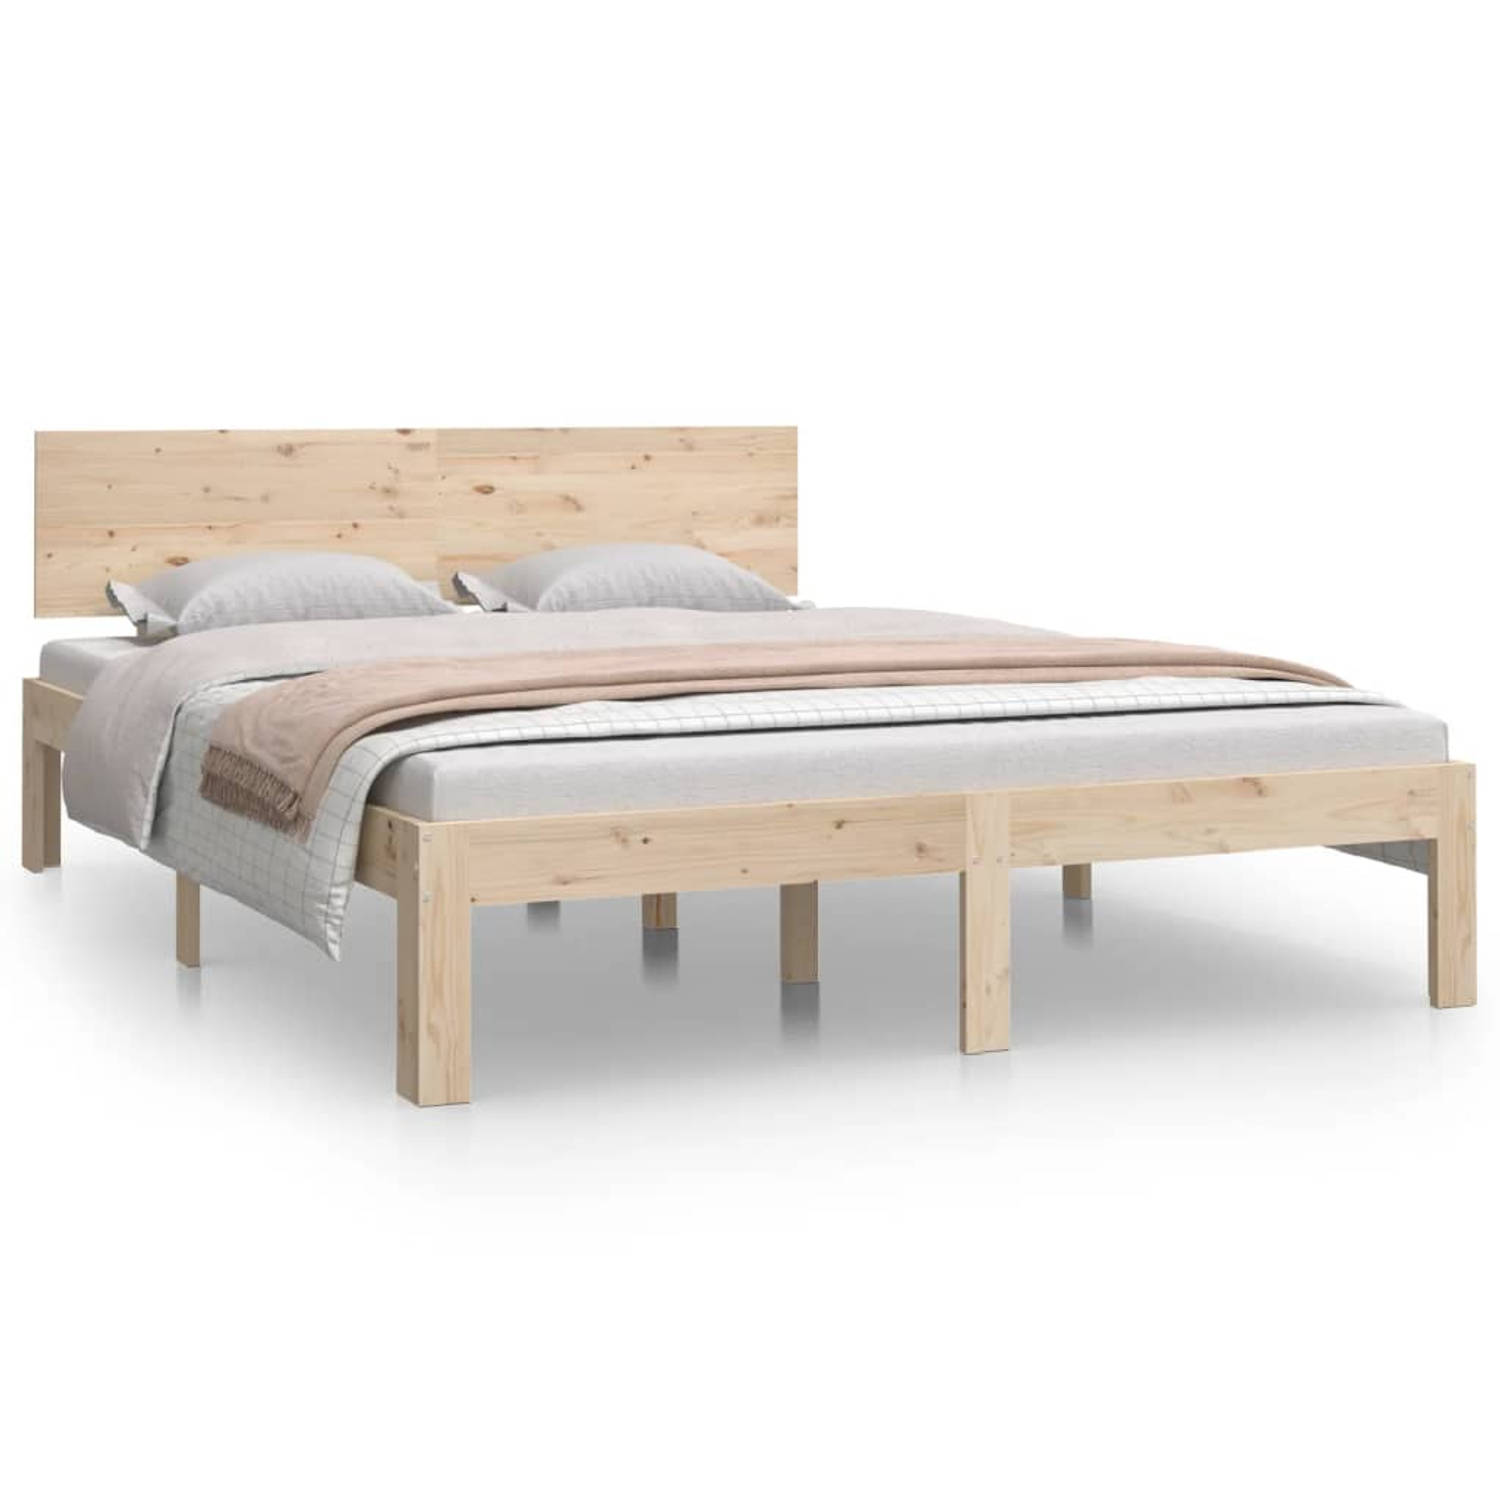 The Living Store Bedframe massief grenenhout 135x190 cm 4FT6 Double - Bed